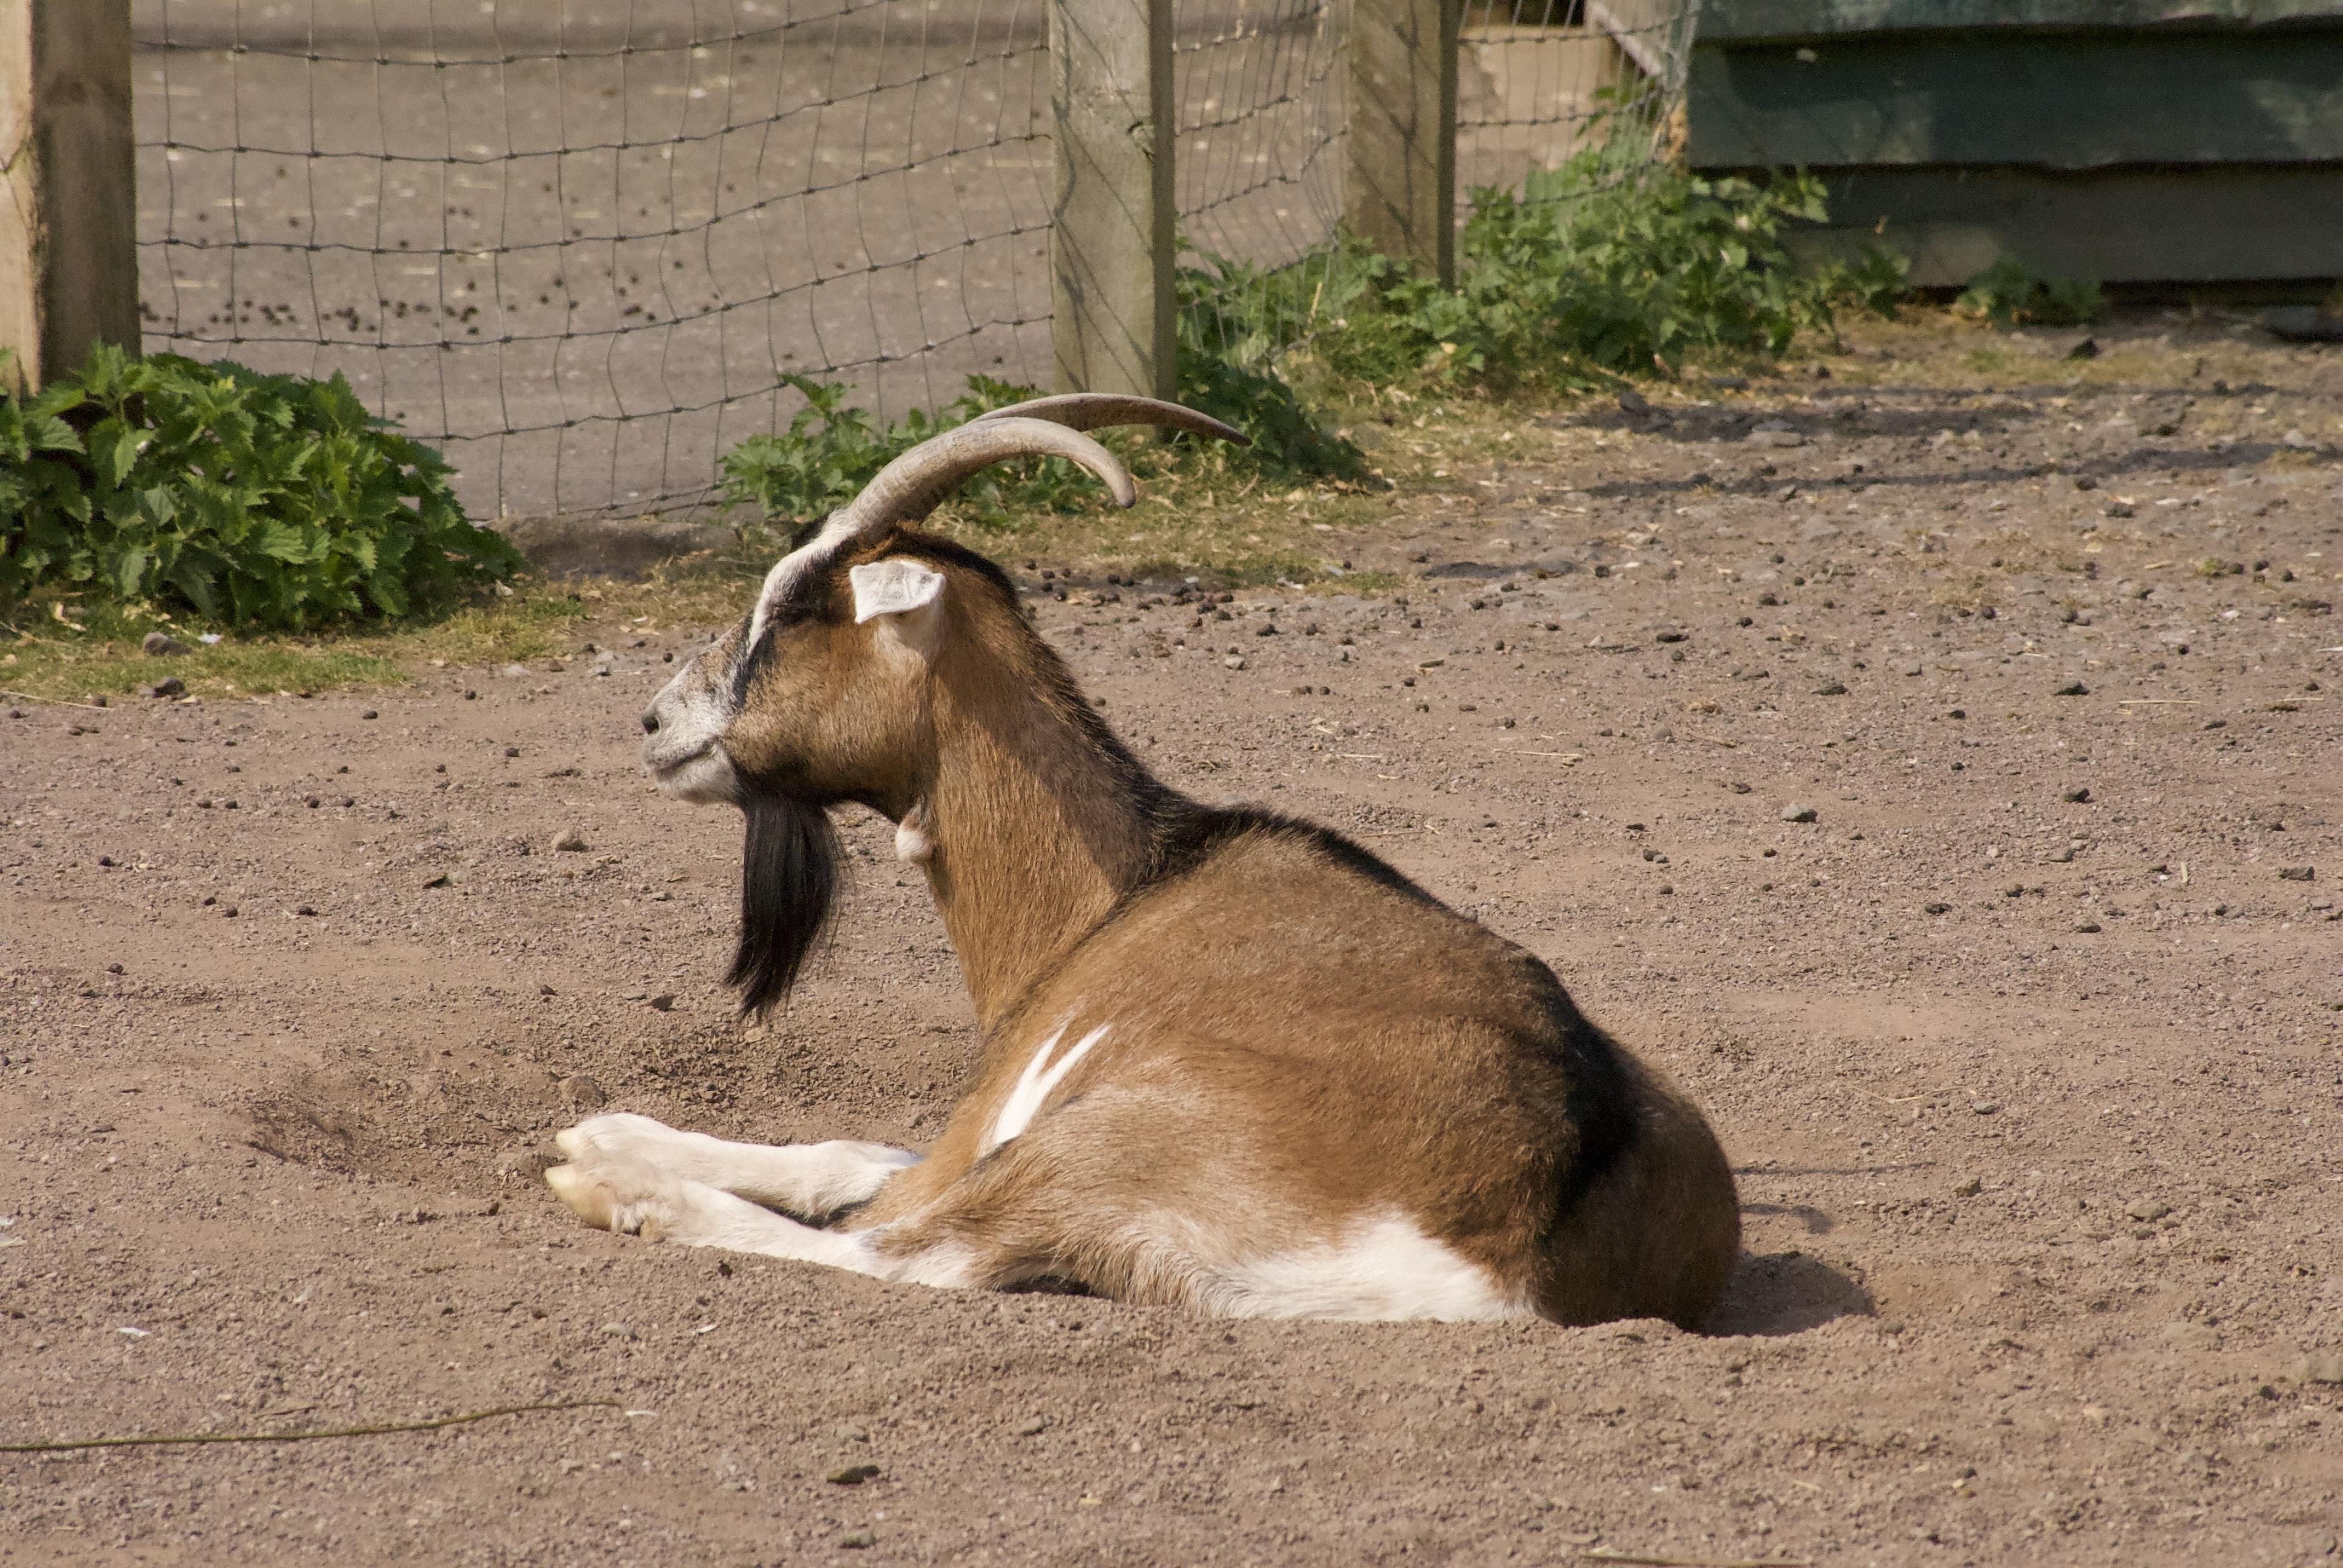  How To Tell If A Goat’s Leg Is Broken 